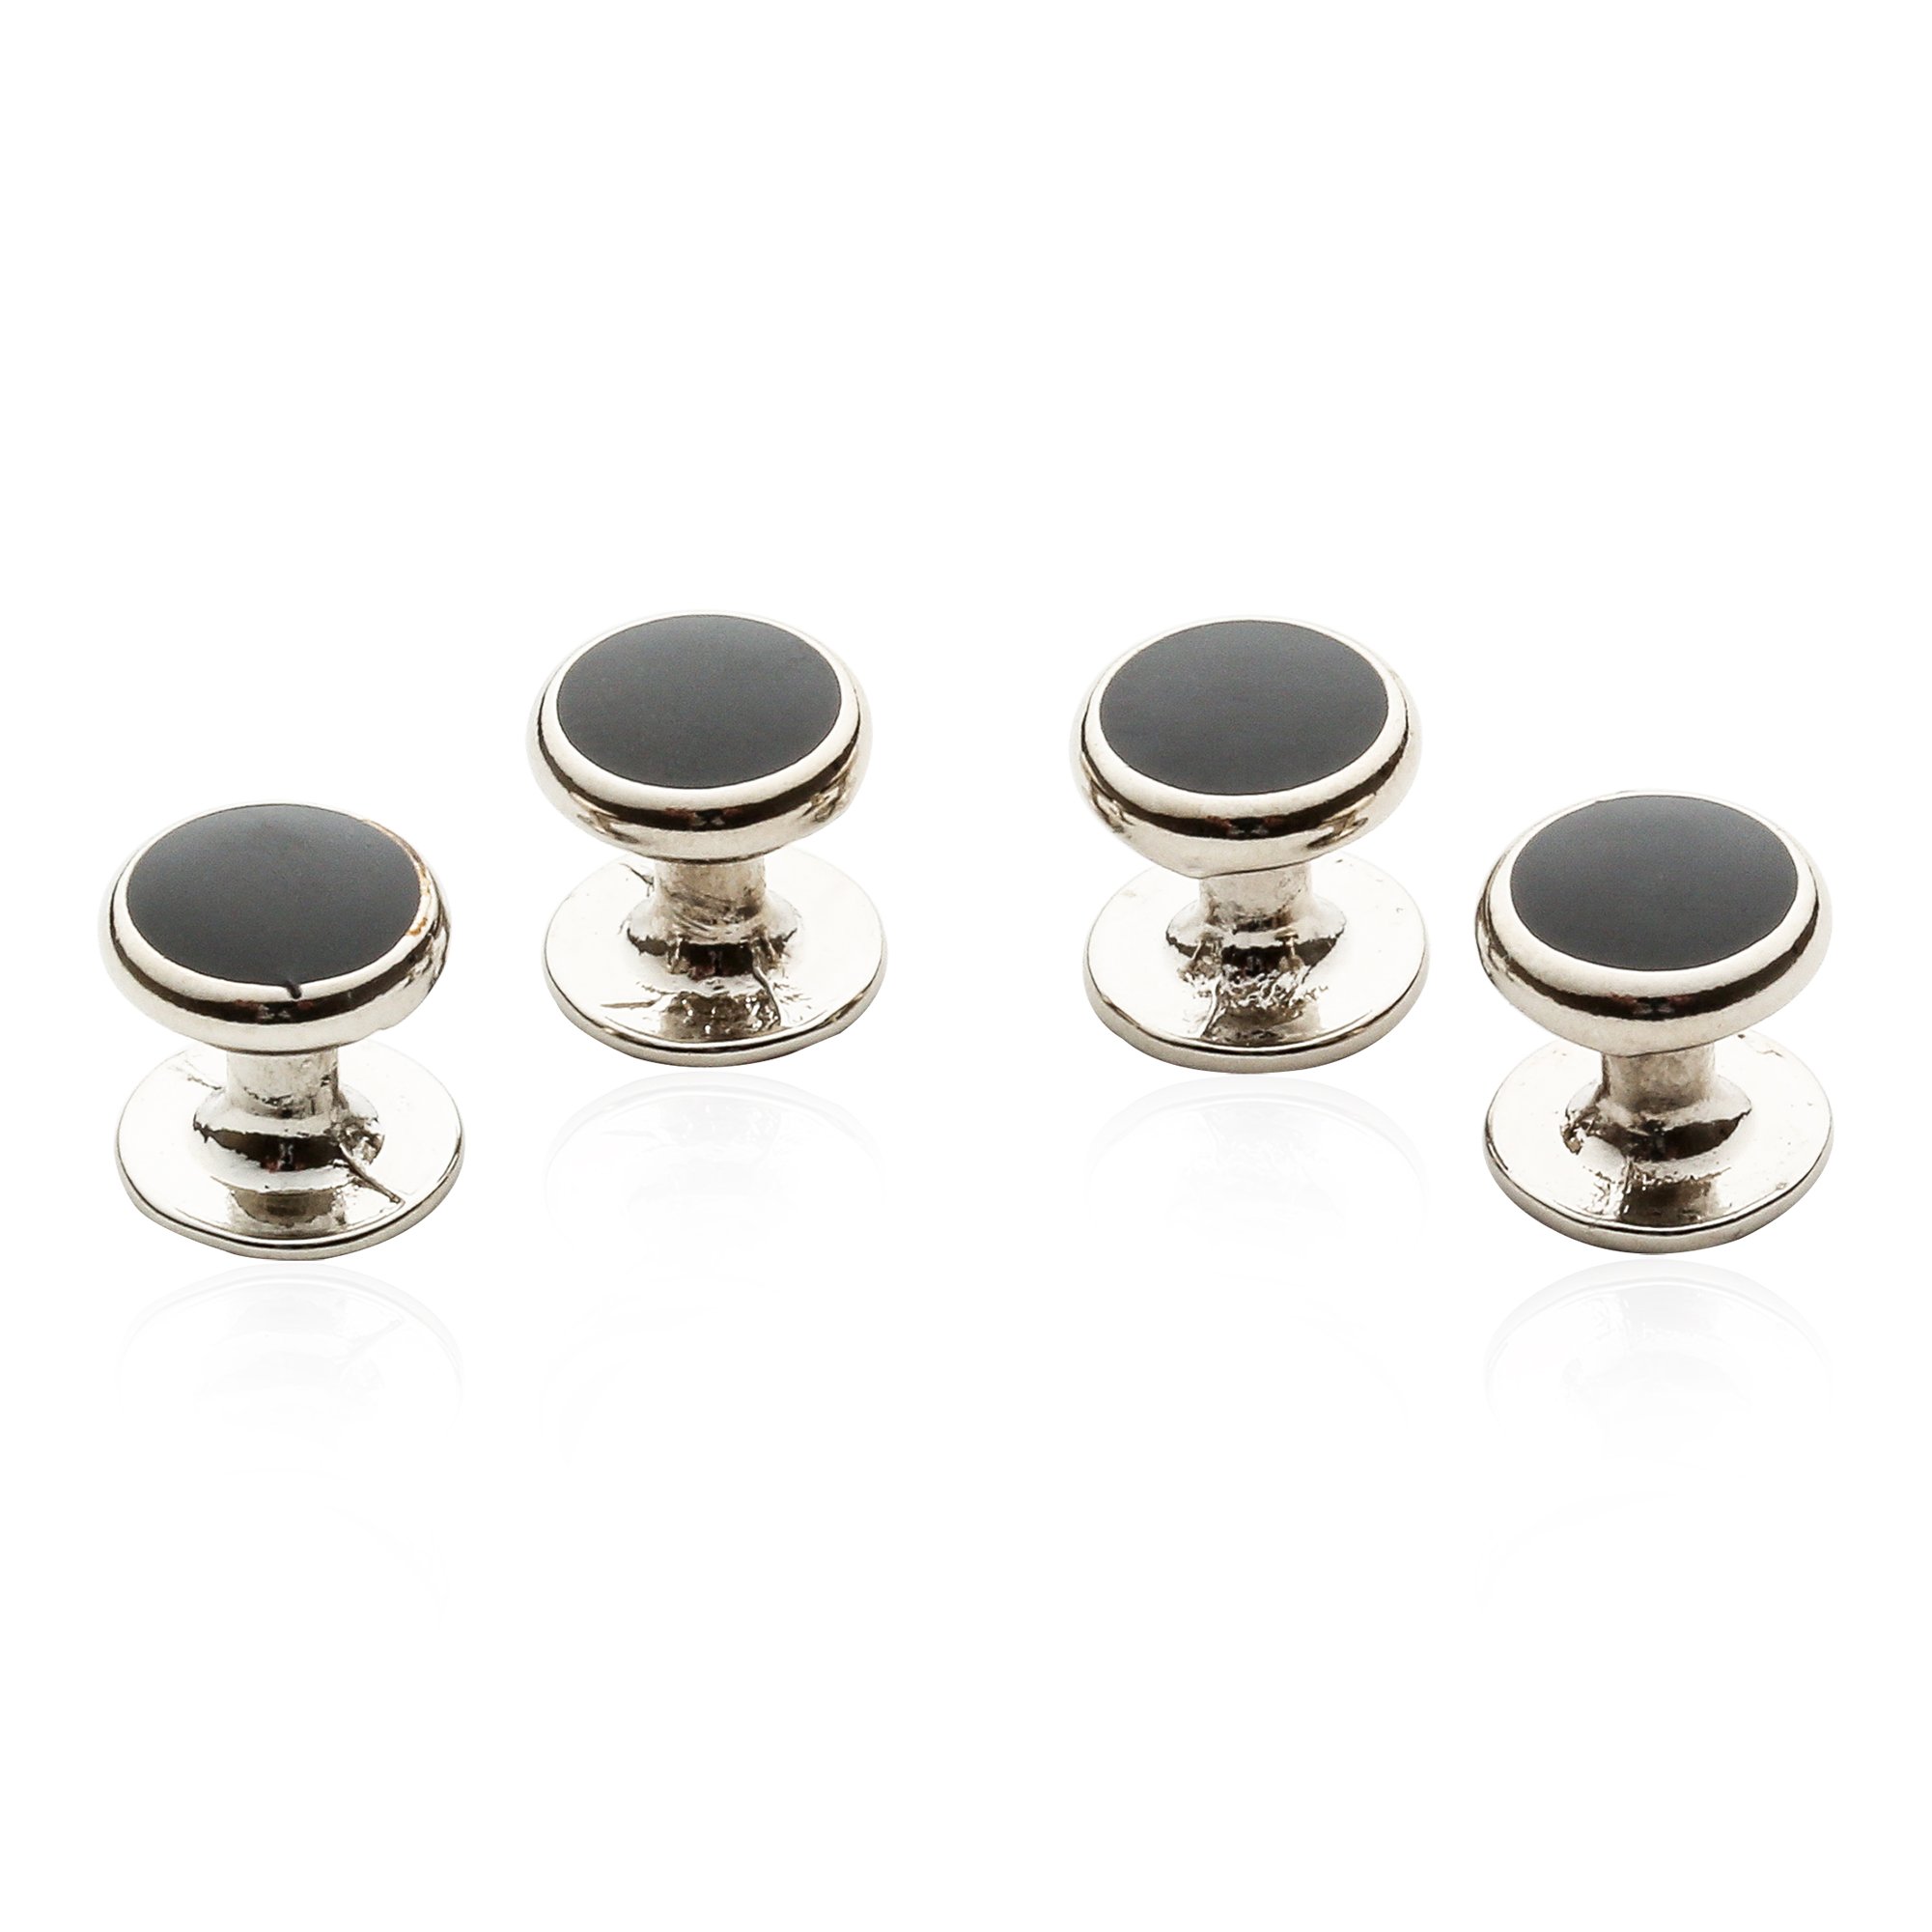 Cuff-Daddy Silver Black Enamel Shirt Studs Set for Tuxedo Wedding Party and Groomsmen in Velour Pouch